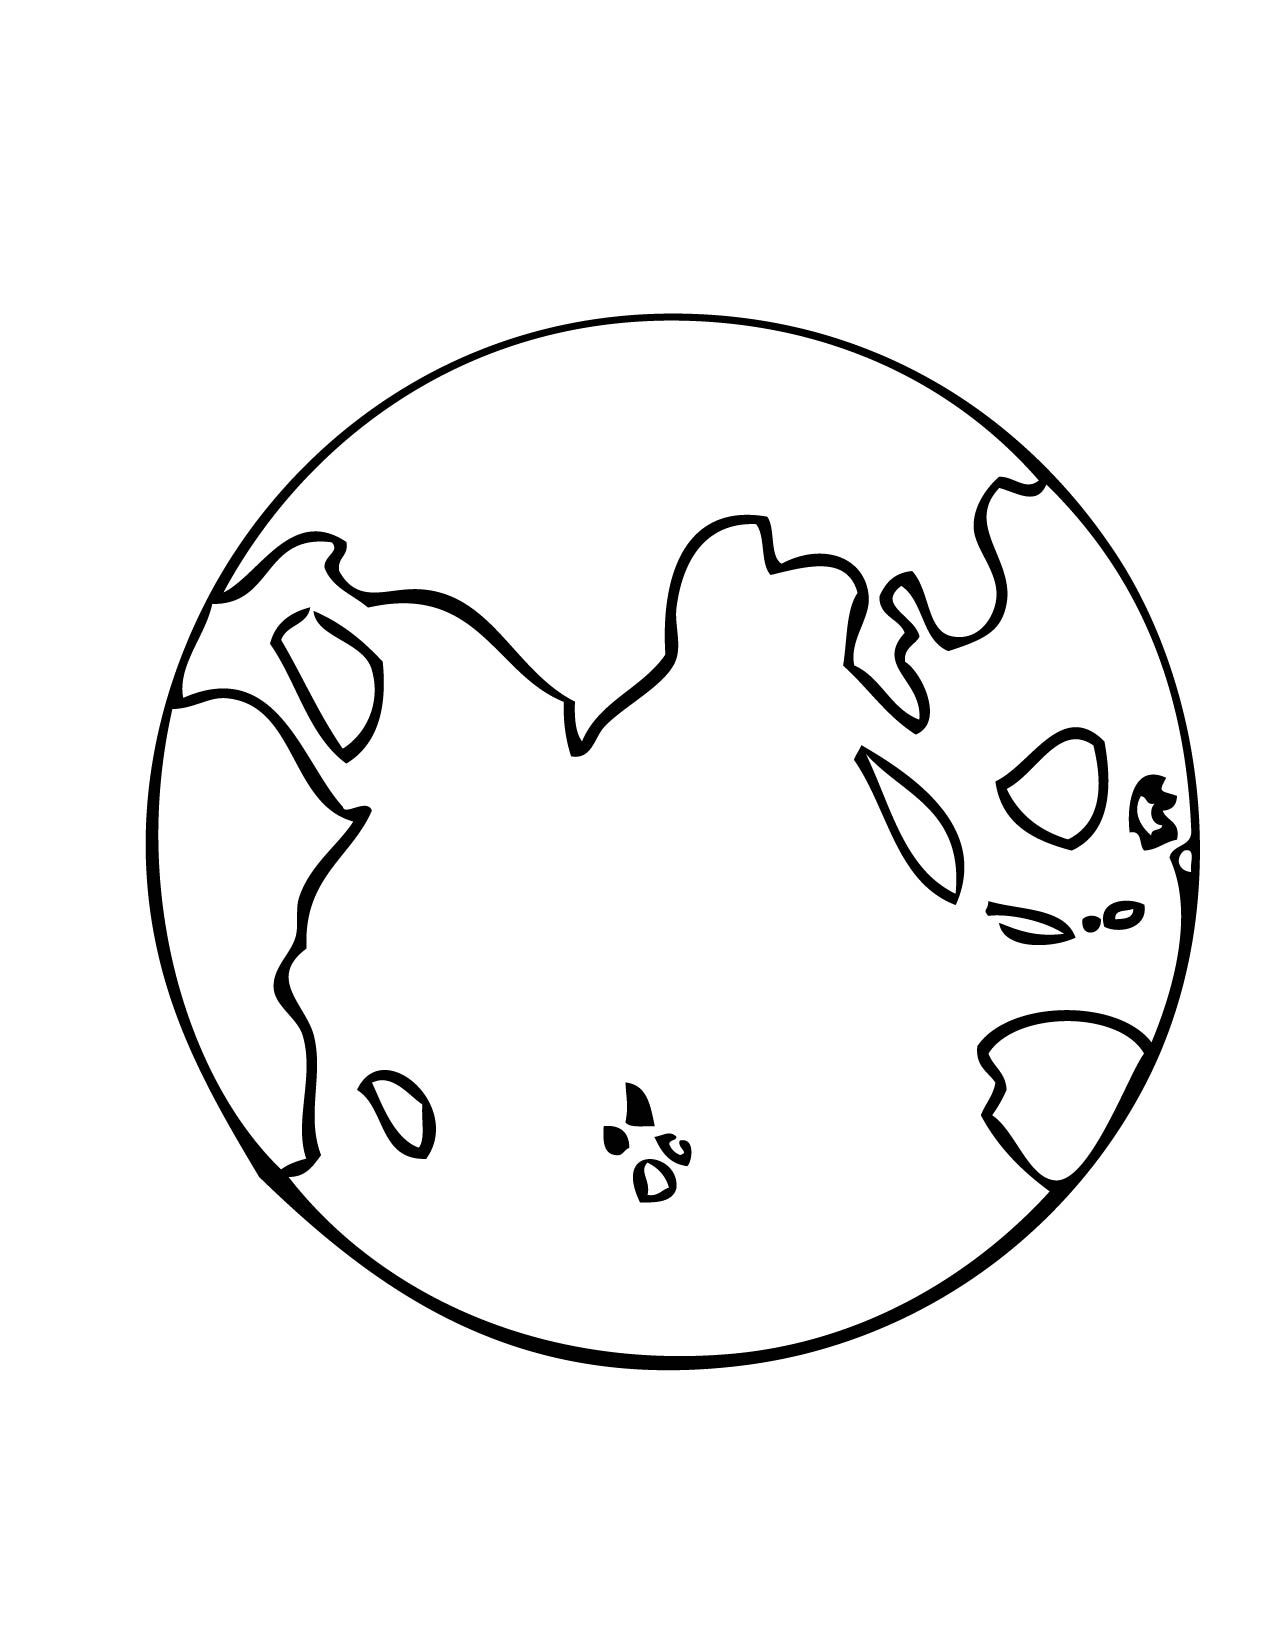 Earth Printable | Free download on ClipArtMag